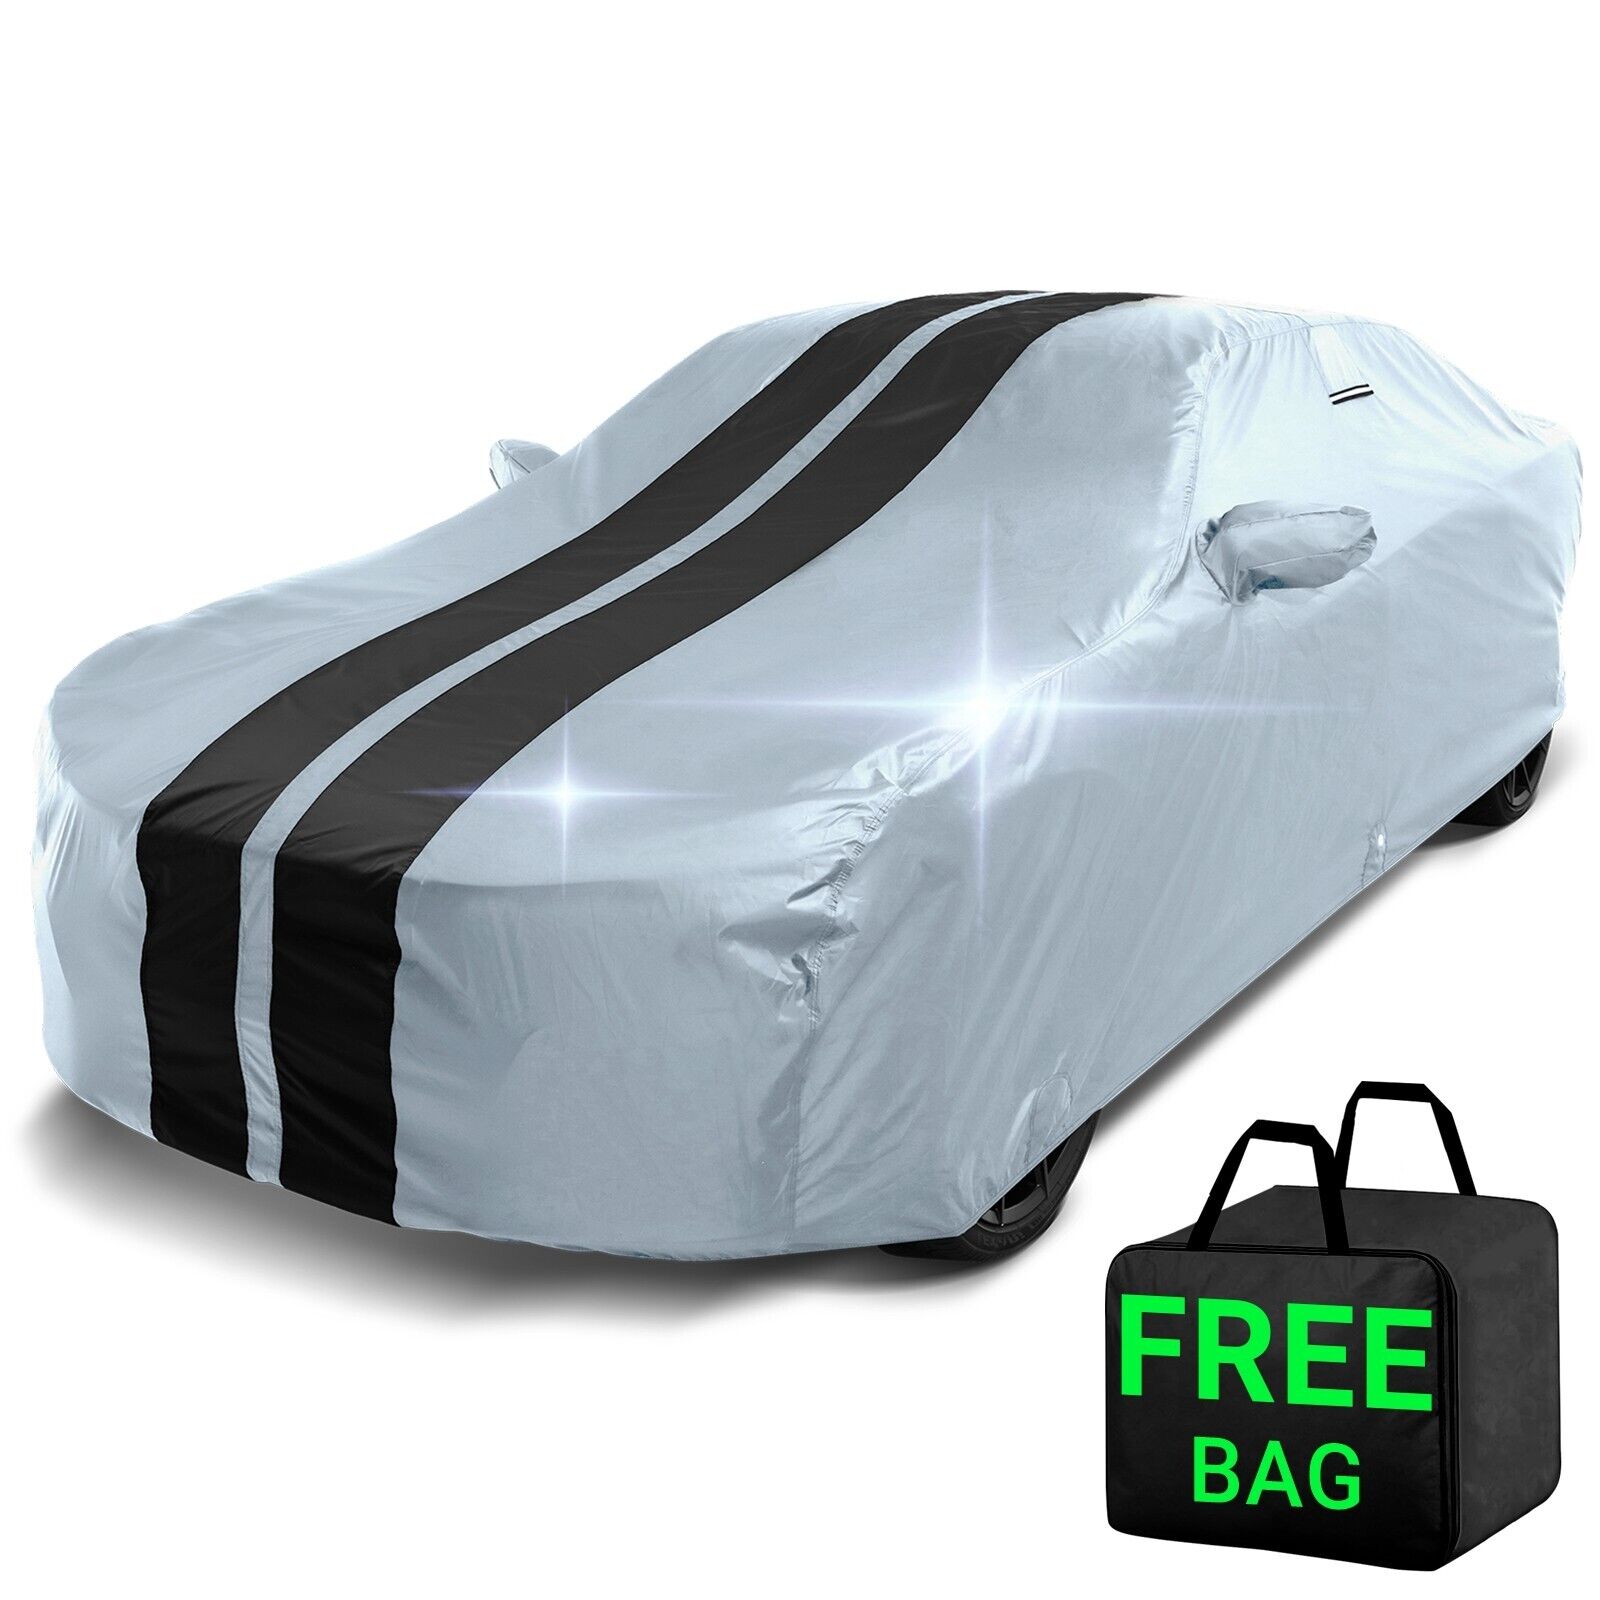 1997-2004 Aston Martin DB7 Custom Car Cover - All-Weather Waterproof Protection